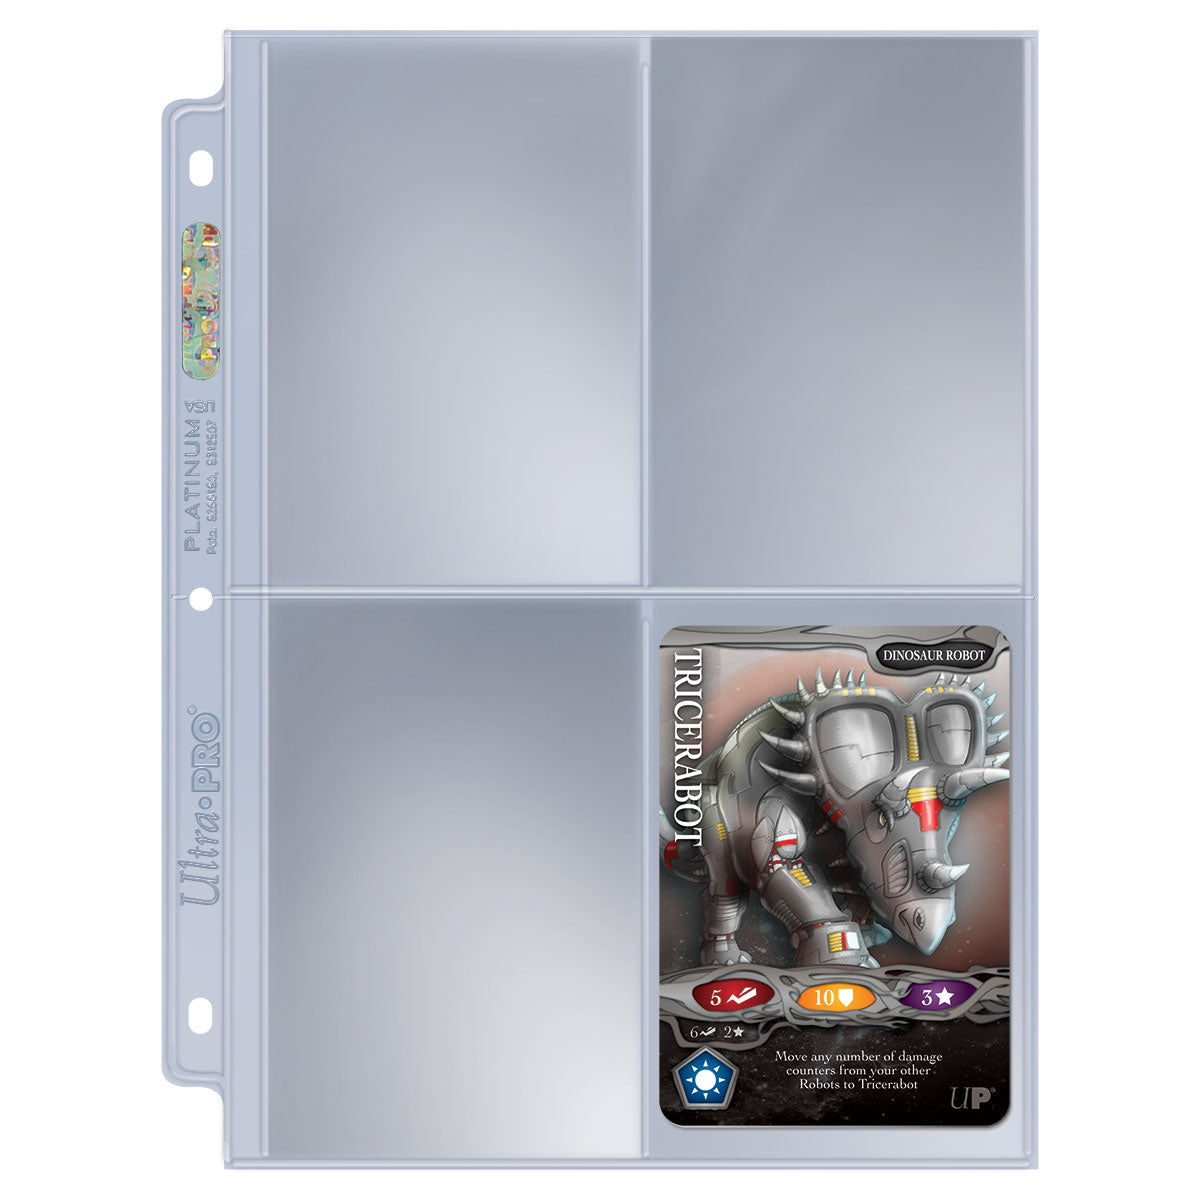 10-Pack) Ultra Pro Pocket Album Pages For 3 Ring Binders Cards, Gaming,  Photos